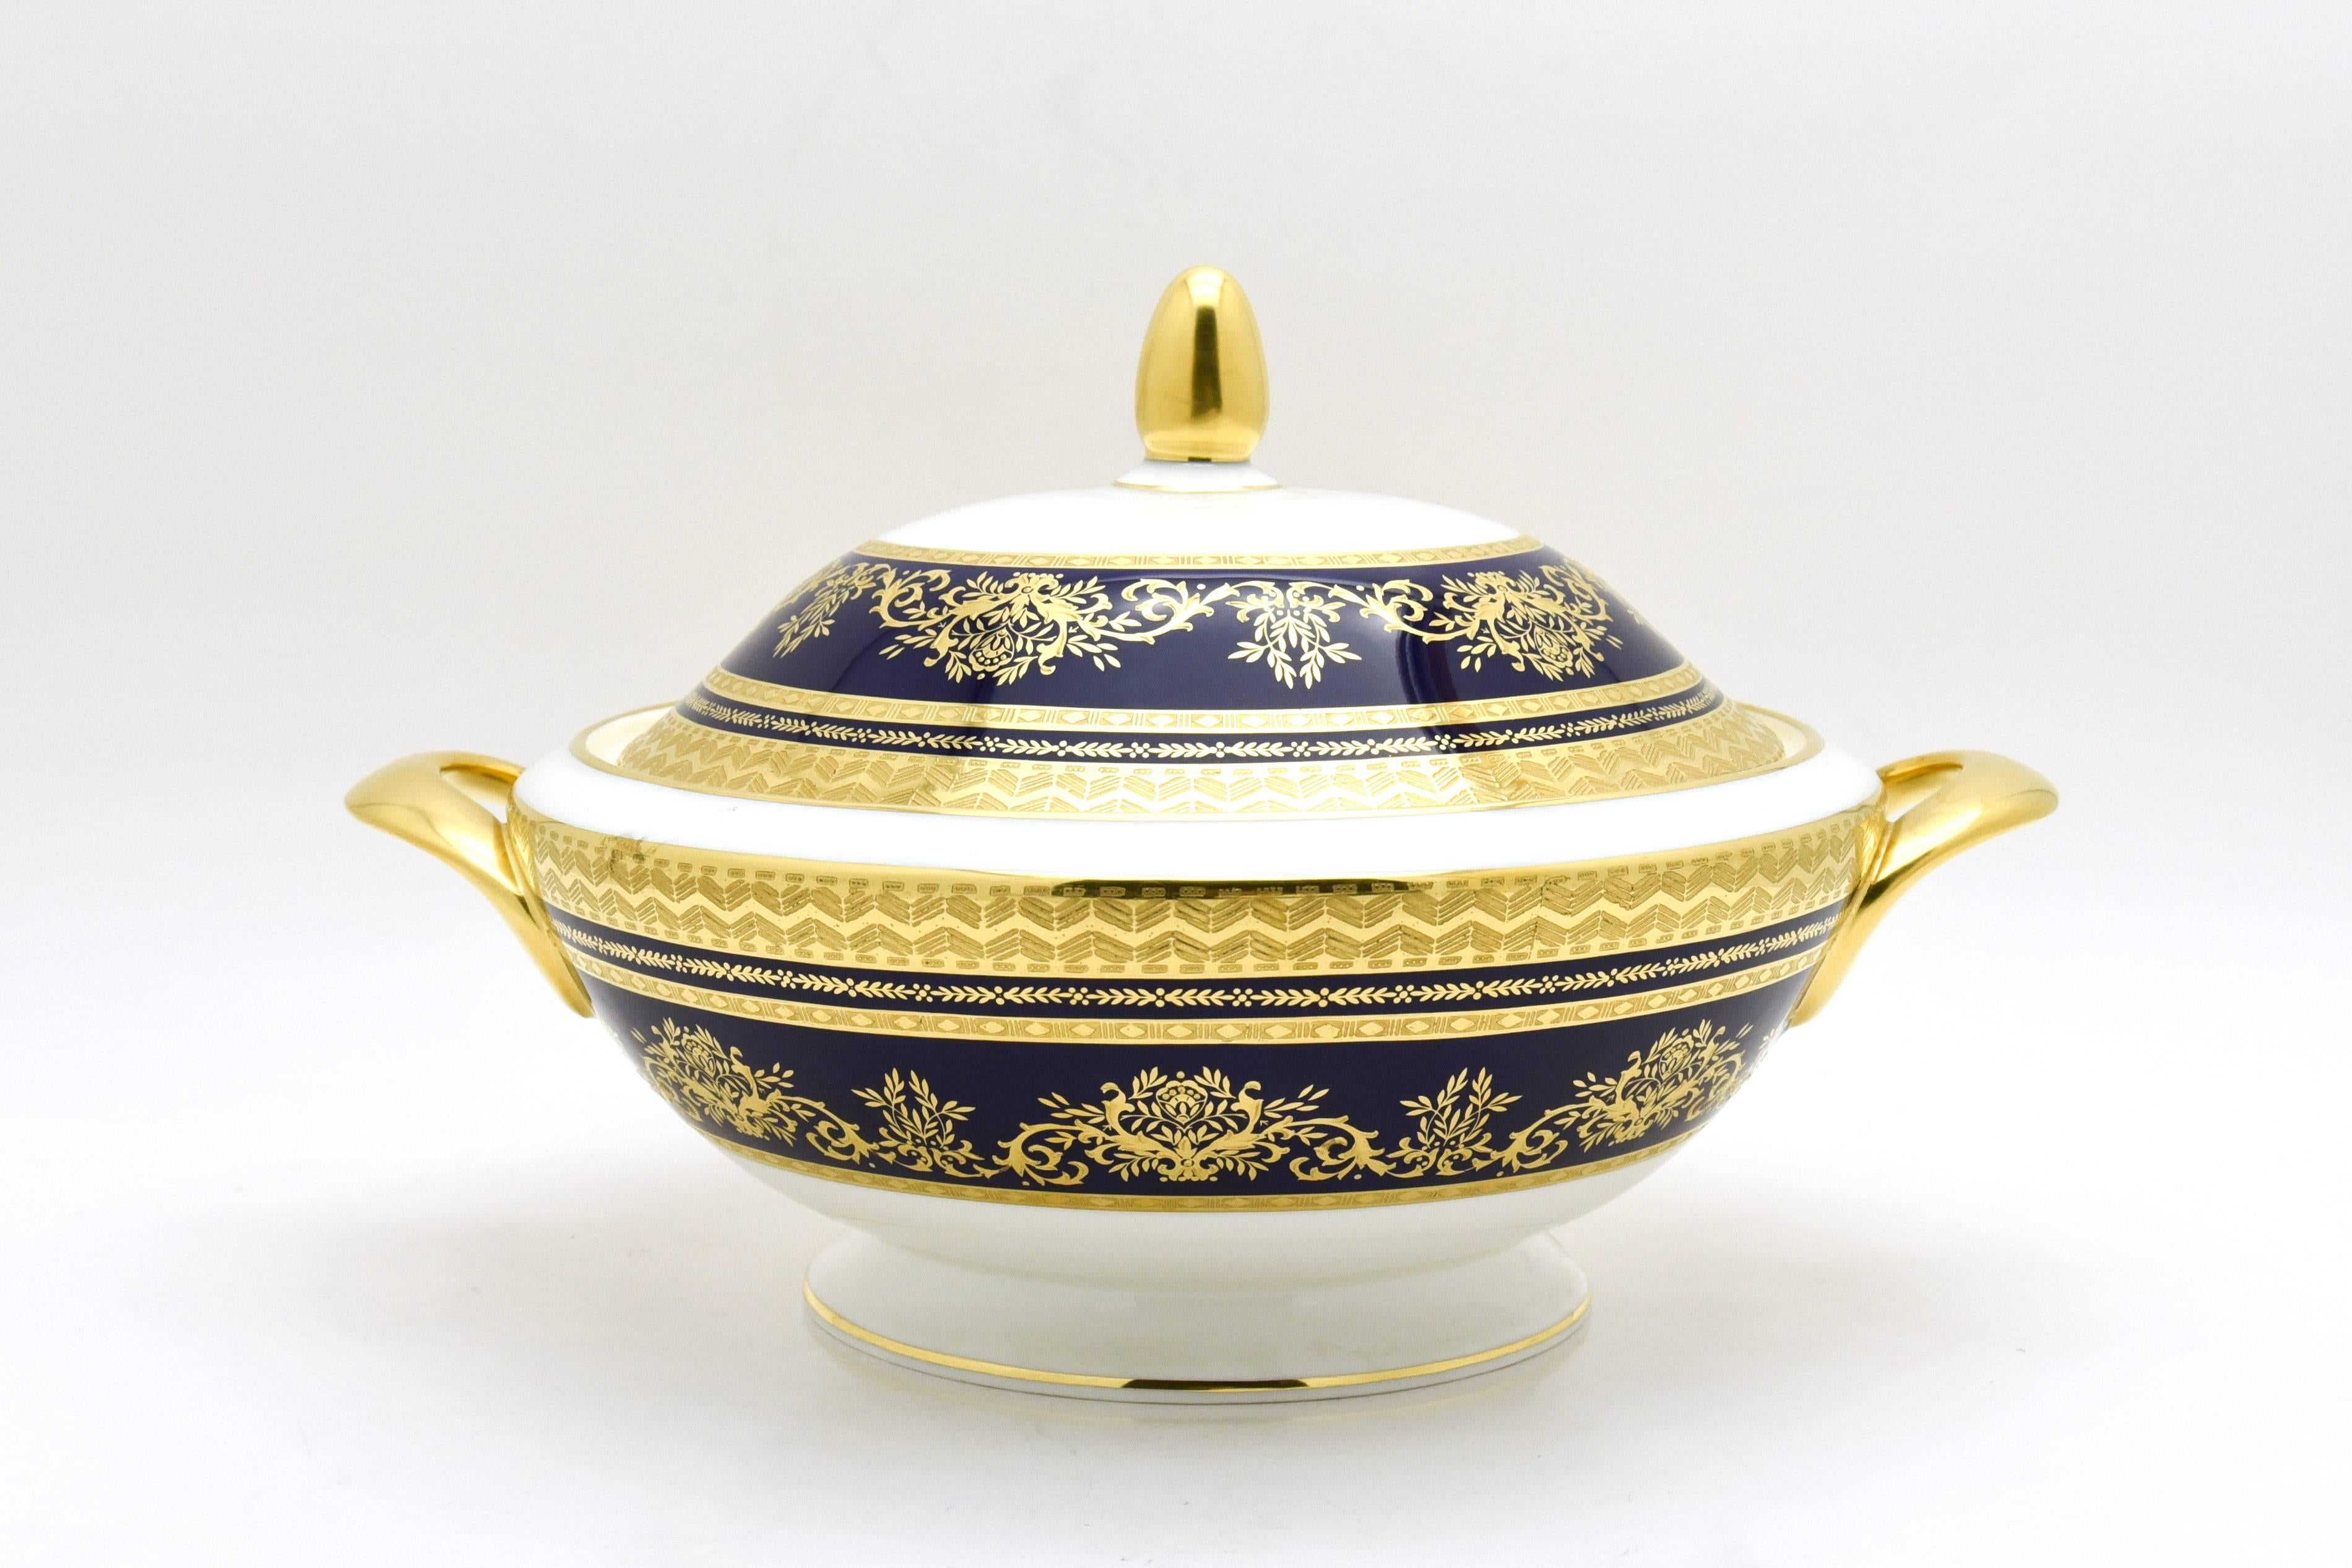 Minton Mazarine Extensive Pristine Dinner Service Cobalt Blue & Gold 232 Pcs In Excellent Condition For Sale In Great Barrington, MA